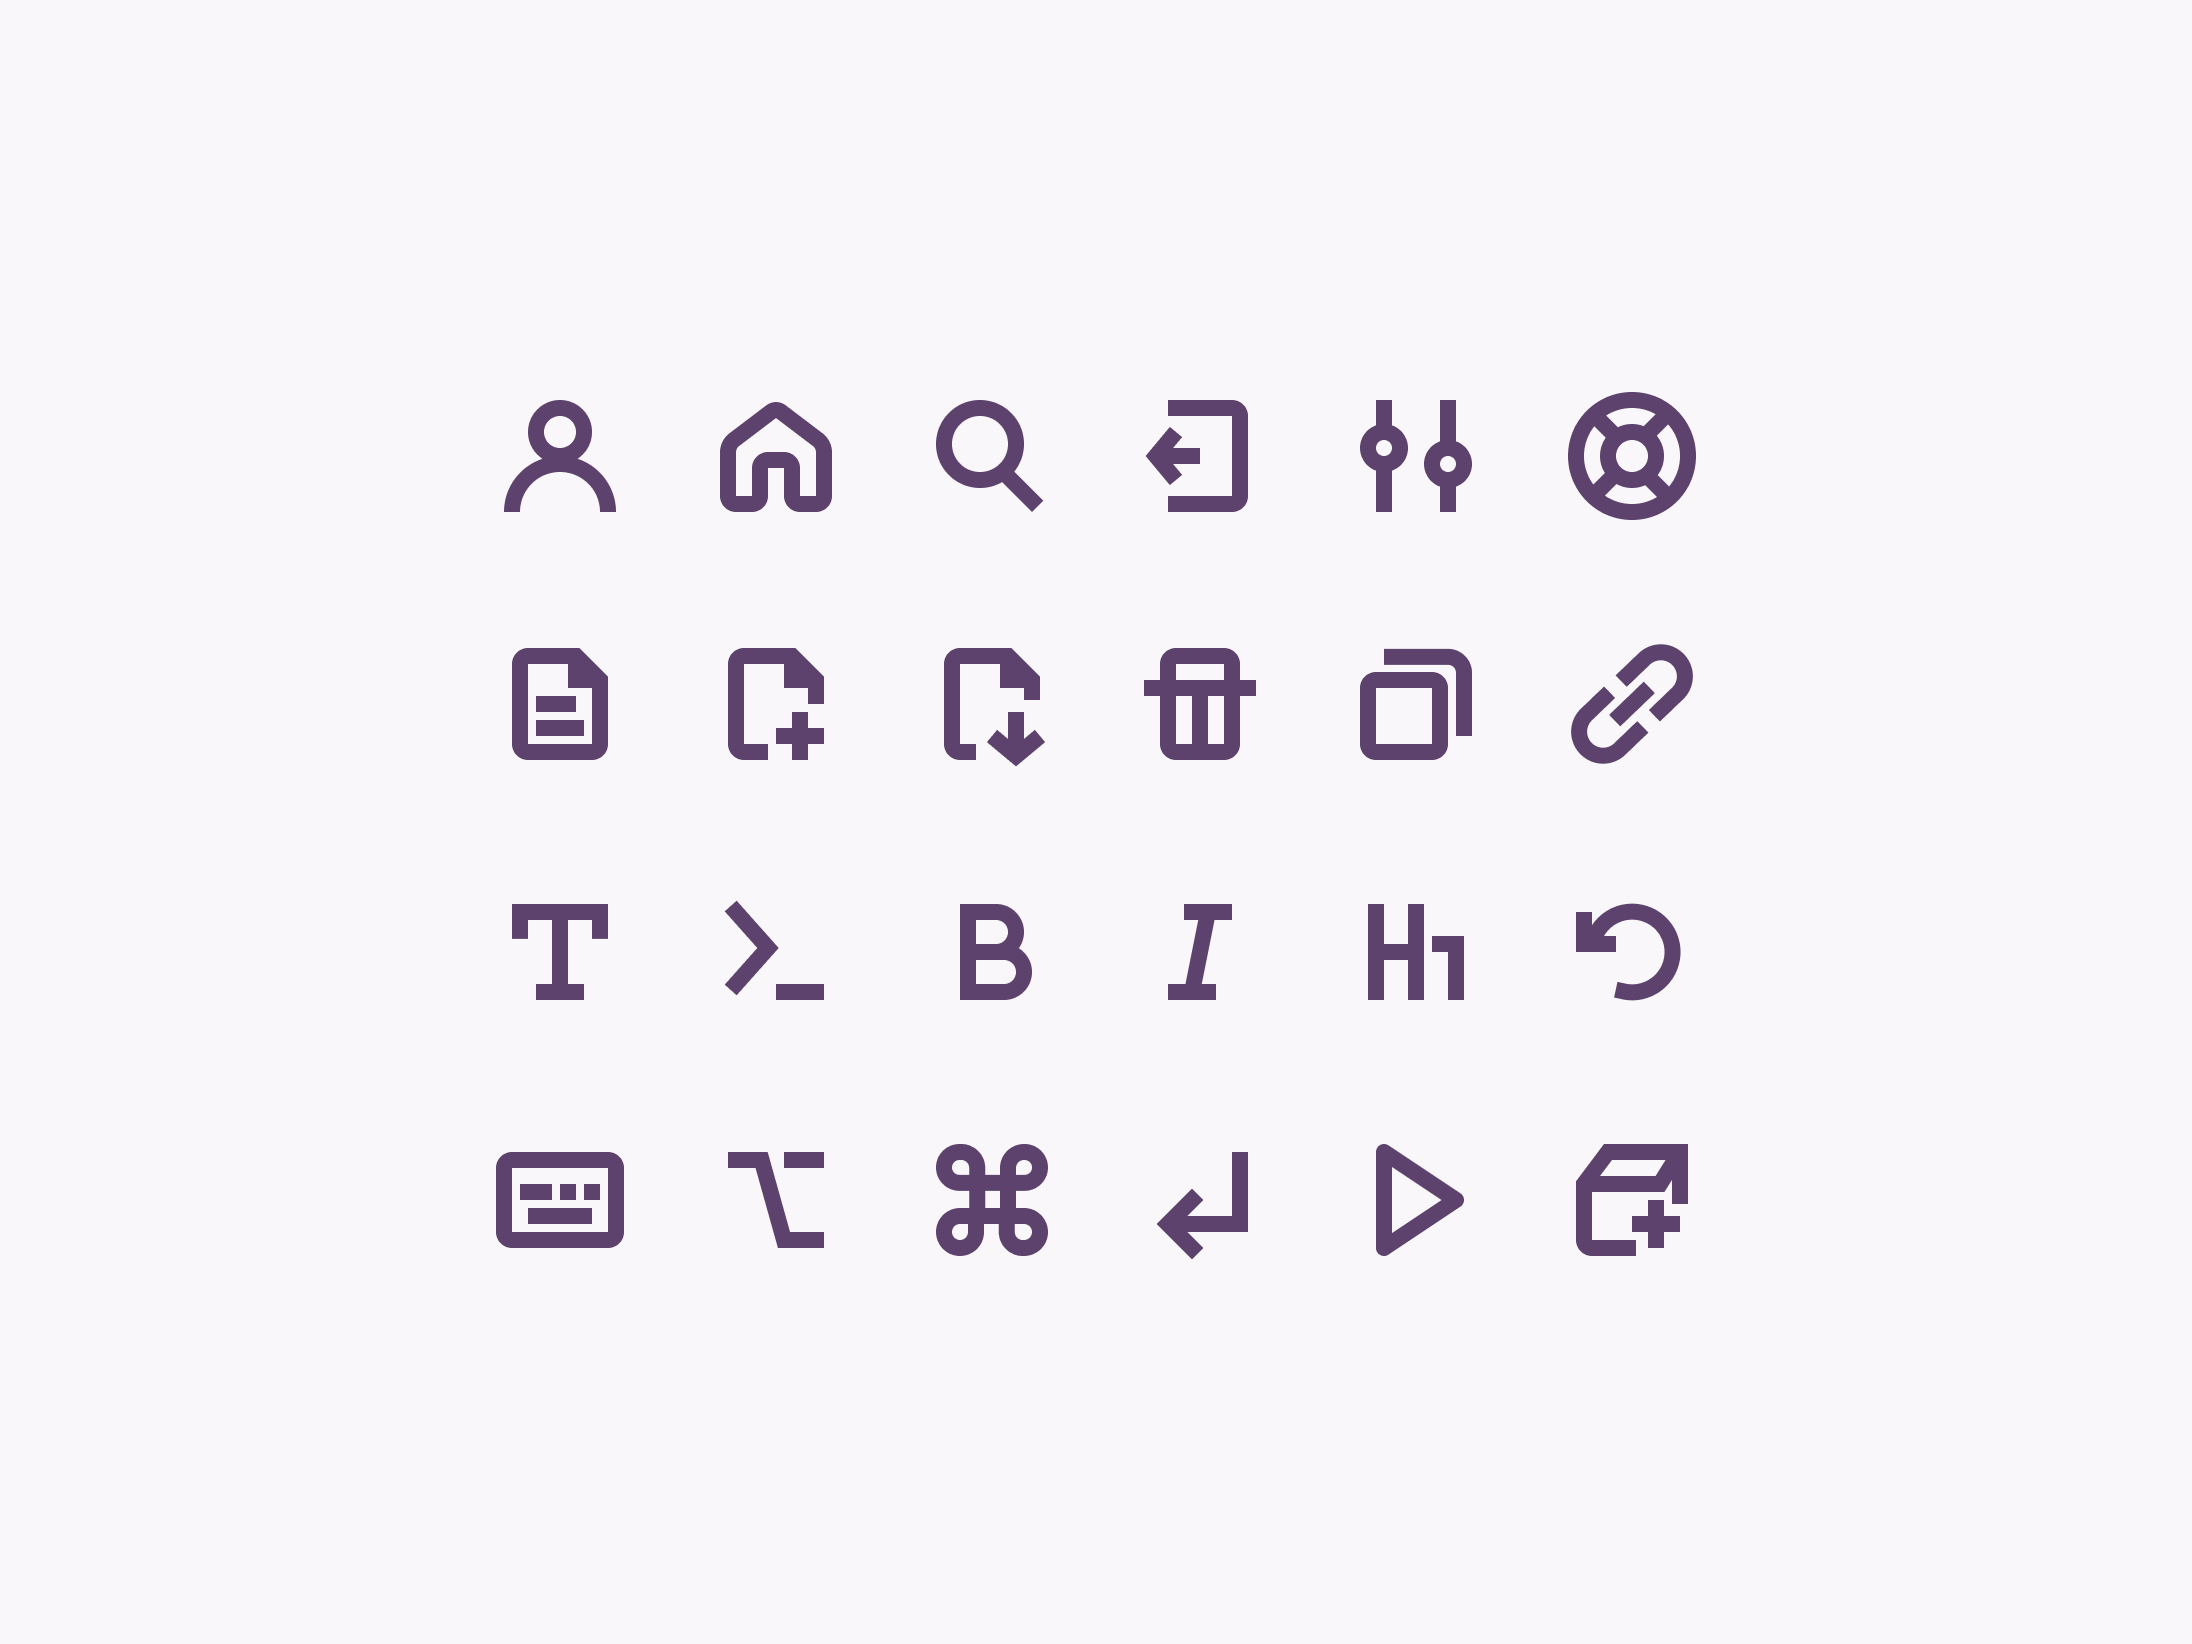 Text editor - Free education icons